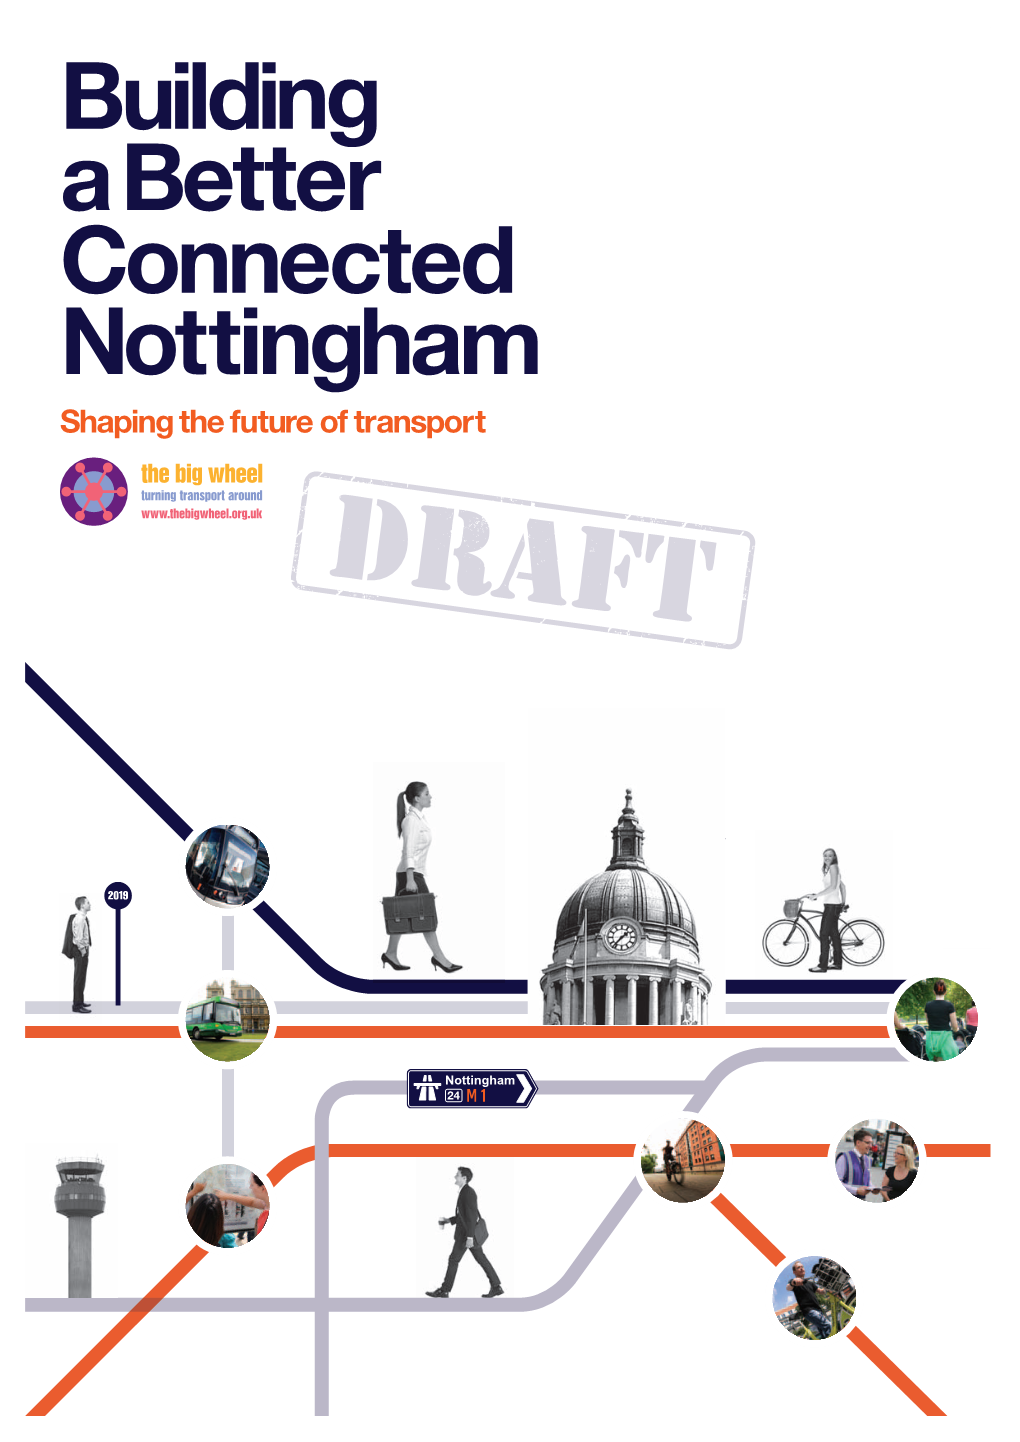 Building a Better Connected Nottingham Shaping the Future of Transport